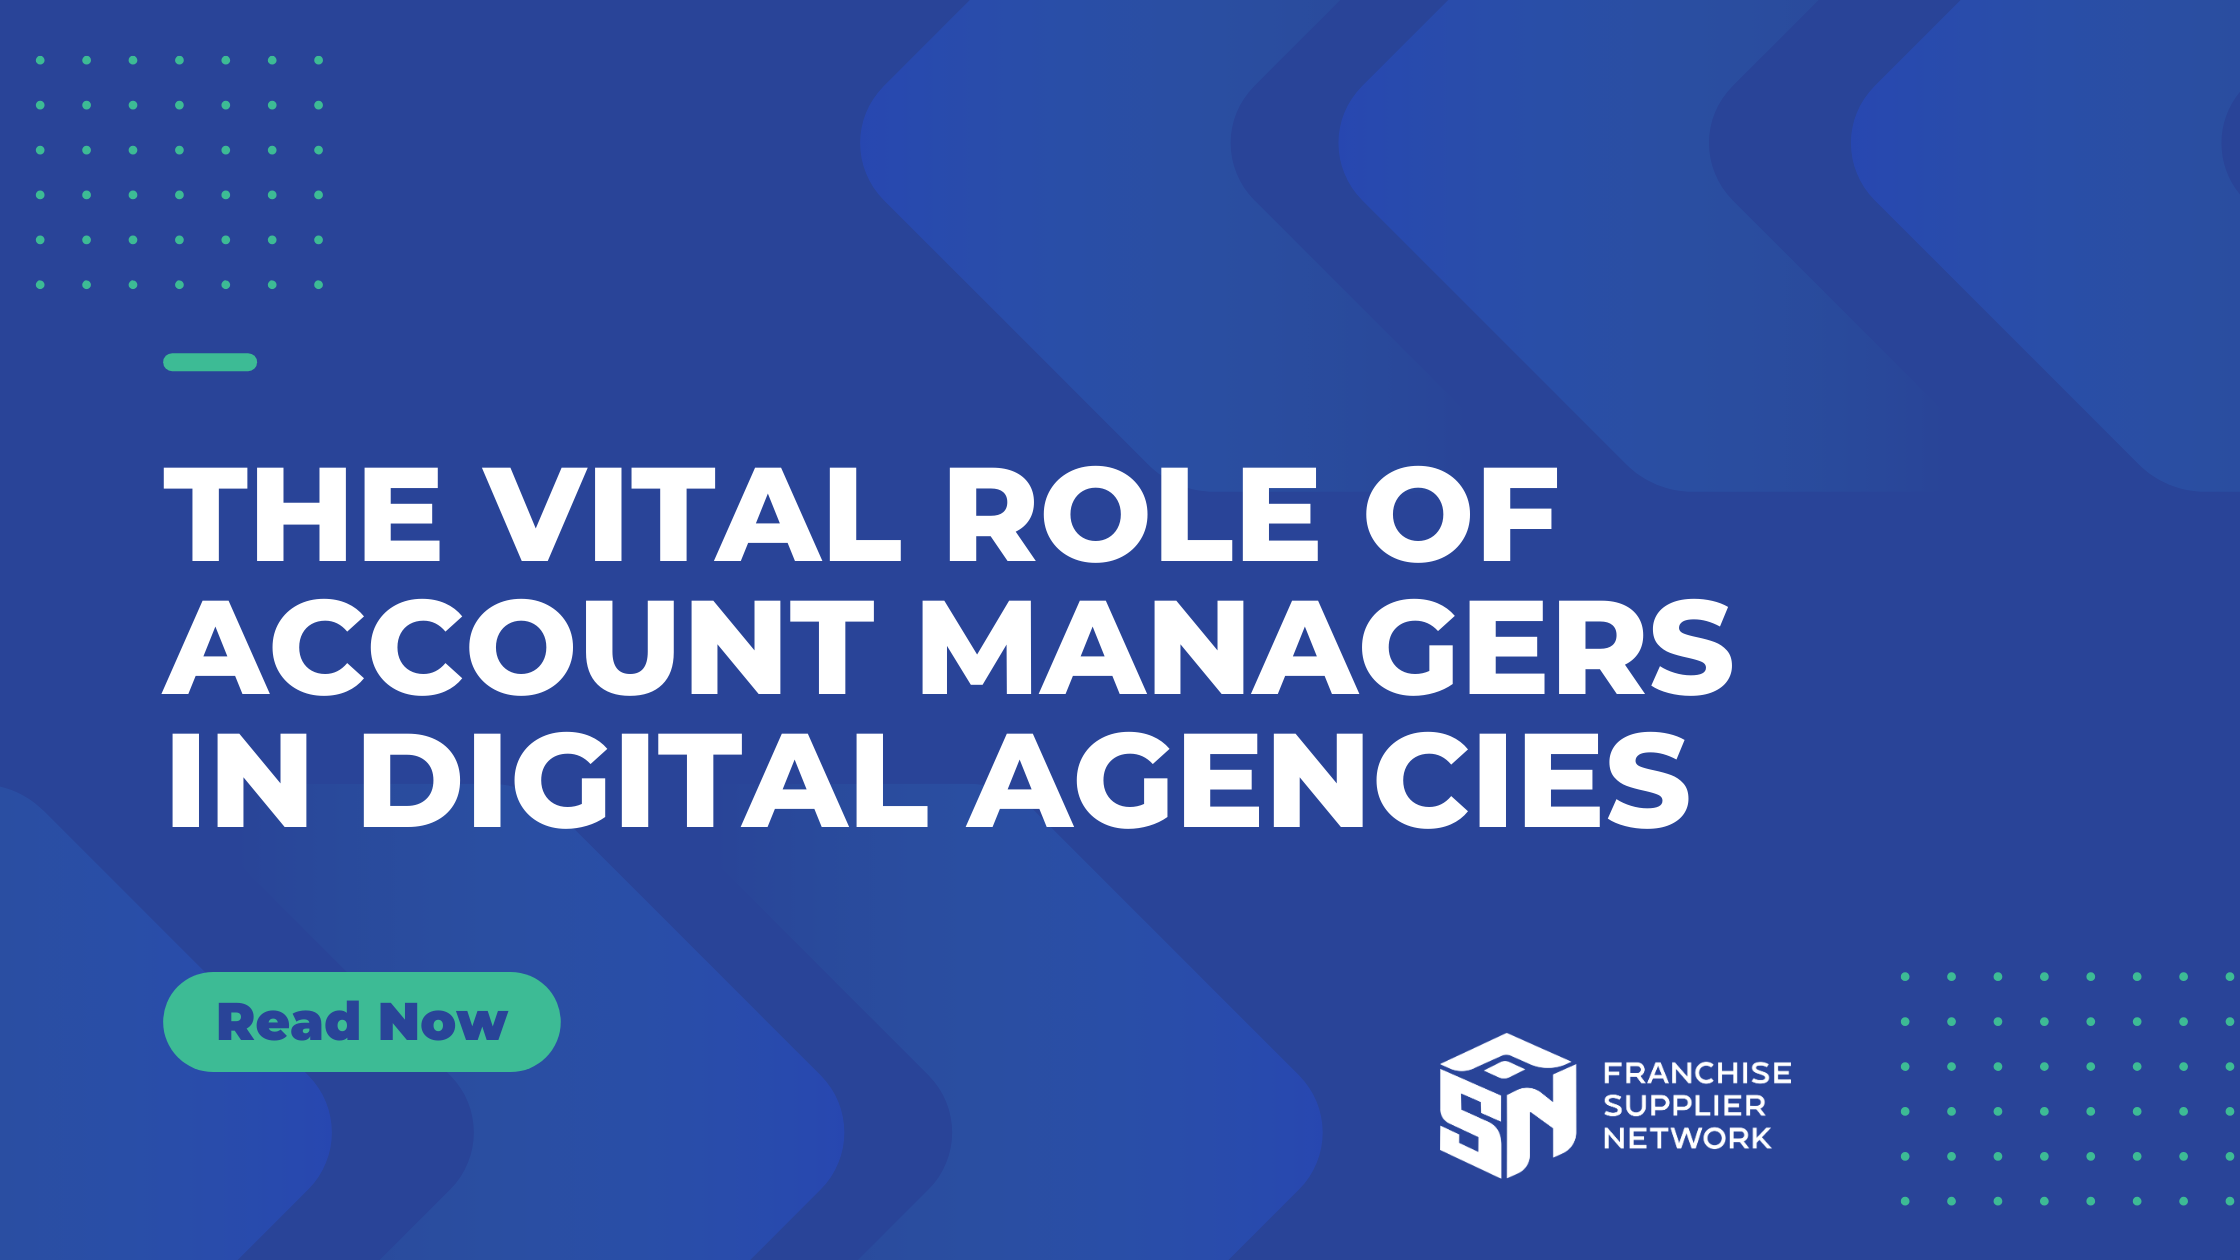 The Vital Role of Account Managers in Digital Agencies